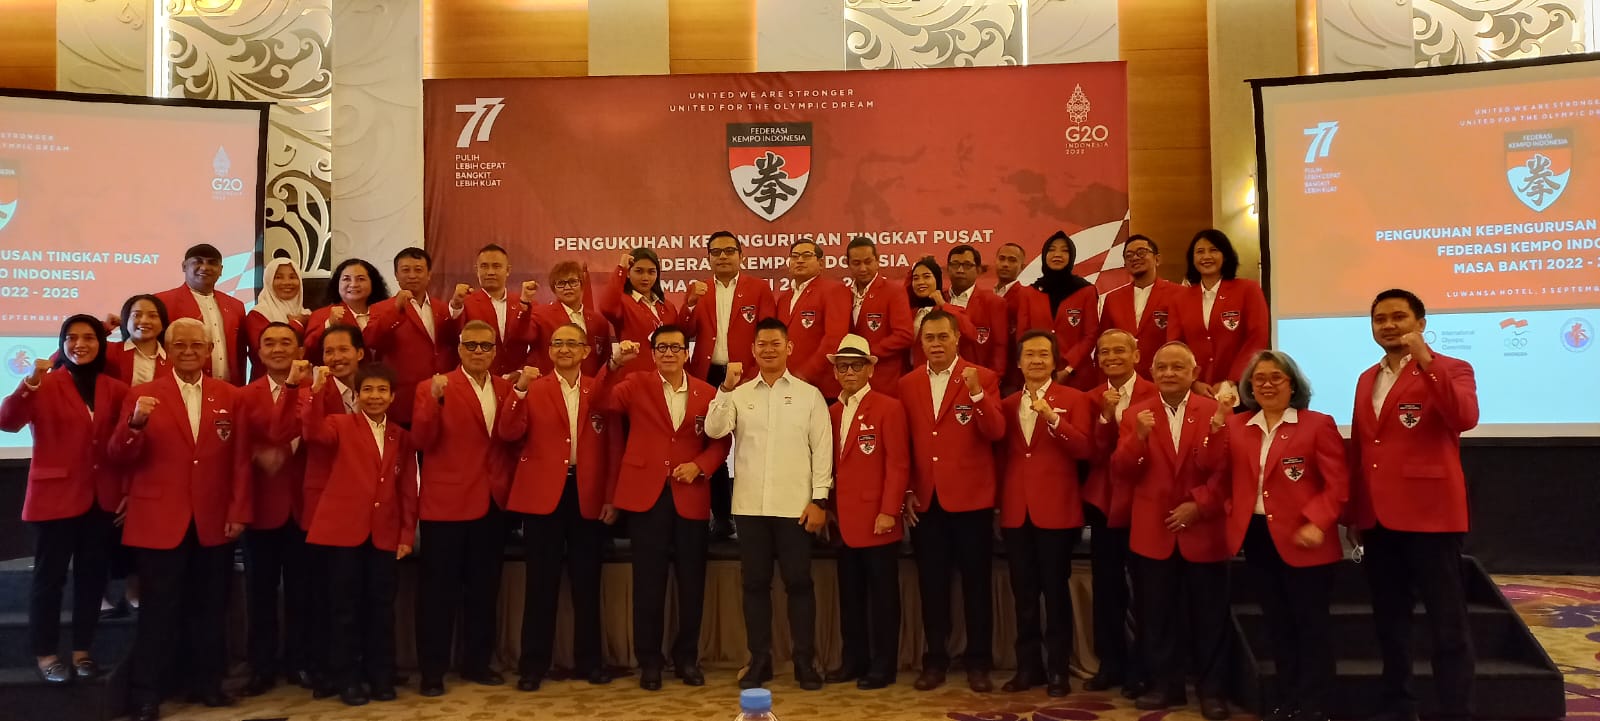 Kempo dreams of Olympic Inclusion - Indonesia Olympic Commitee